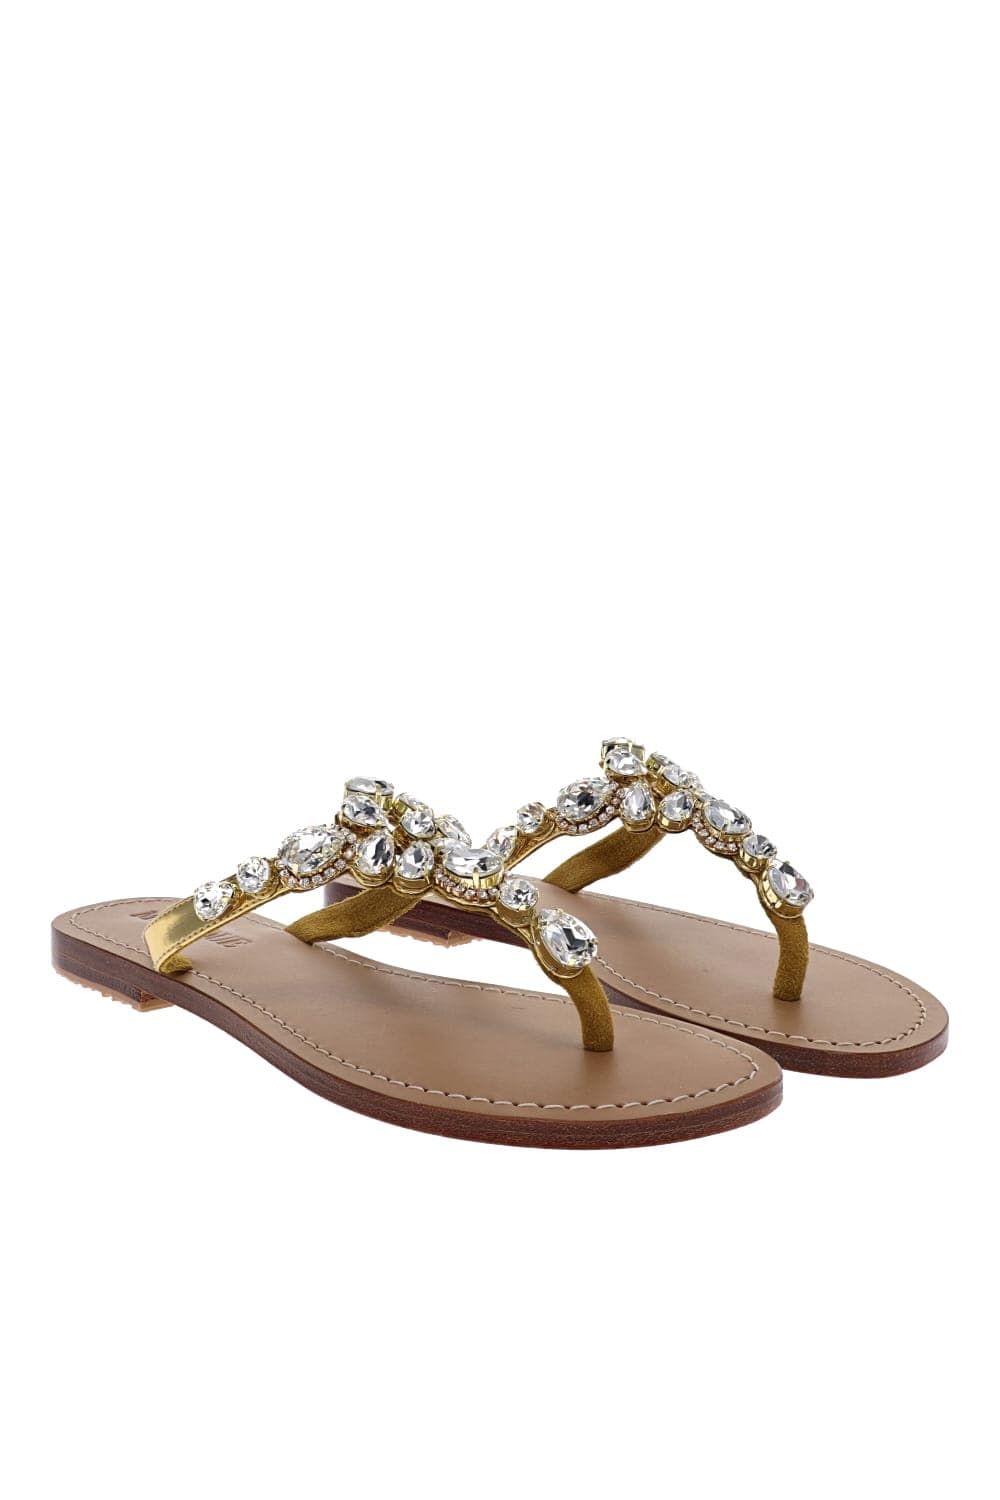 MYSTIQUE Gold Clear Crystal Sandal 8824 Gold/Clear